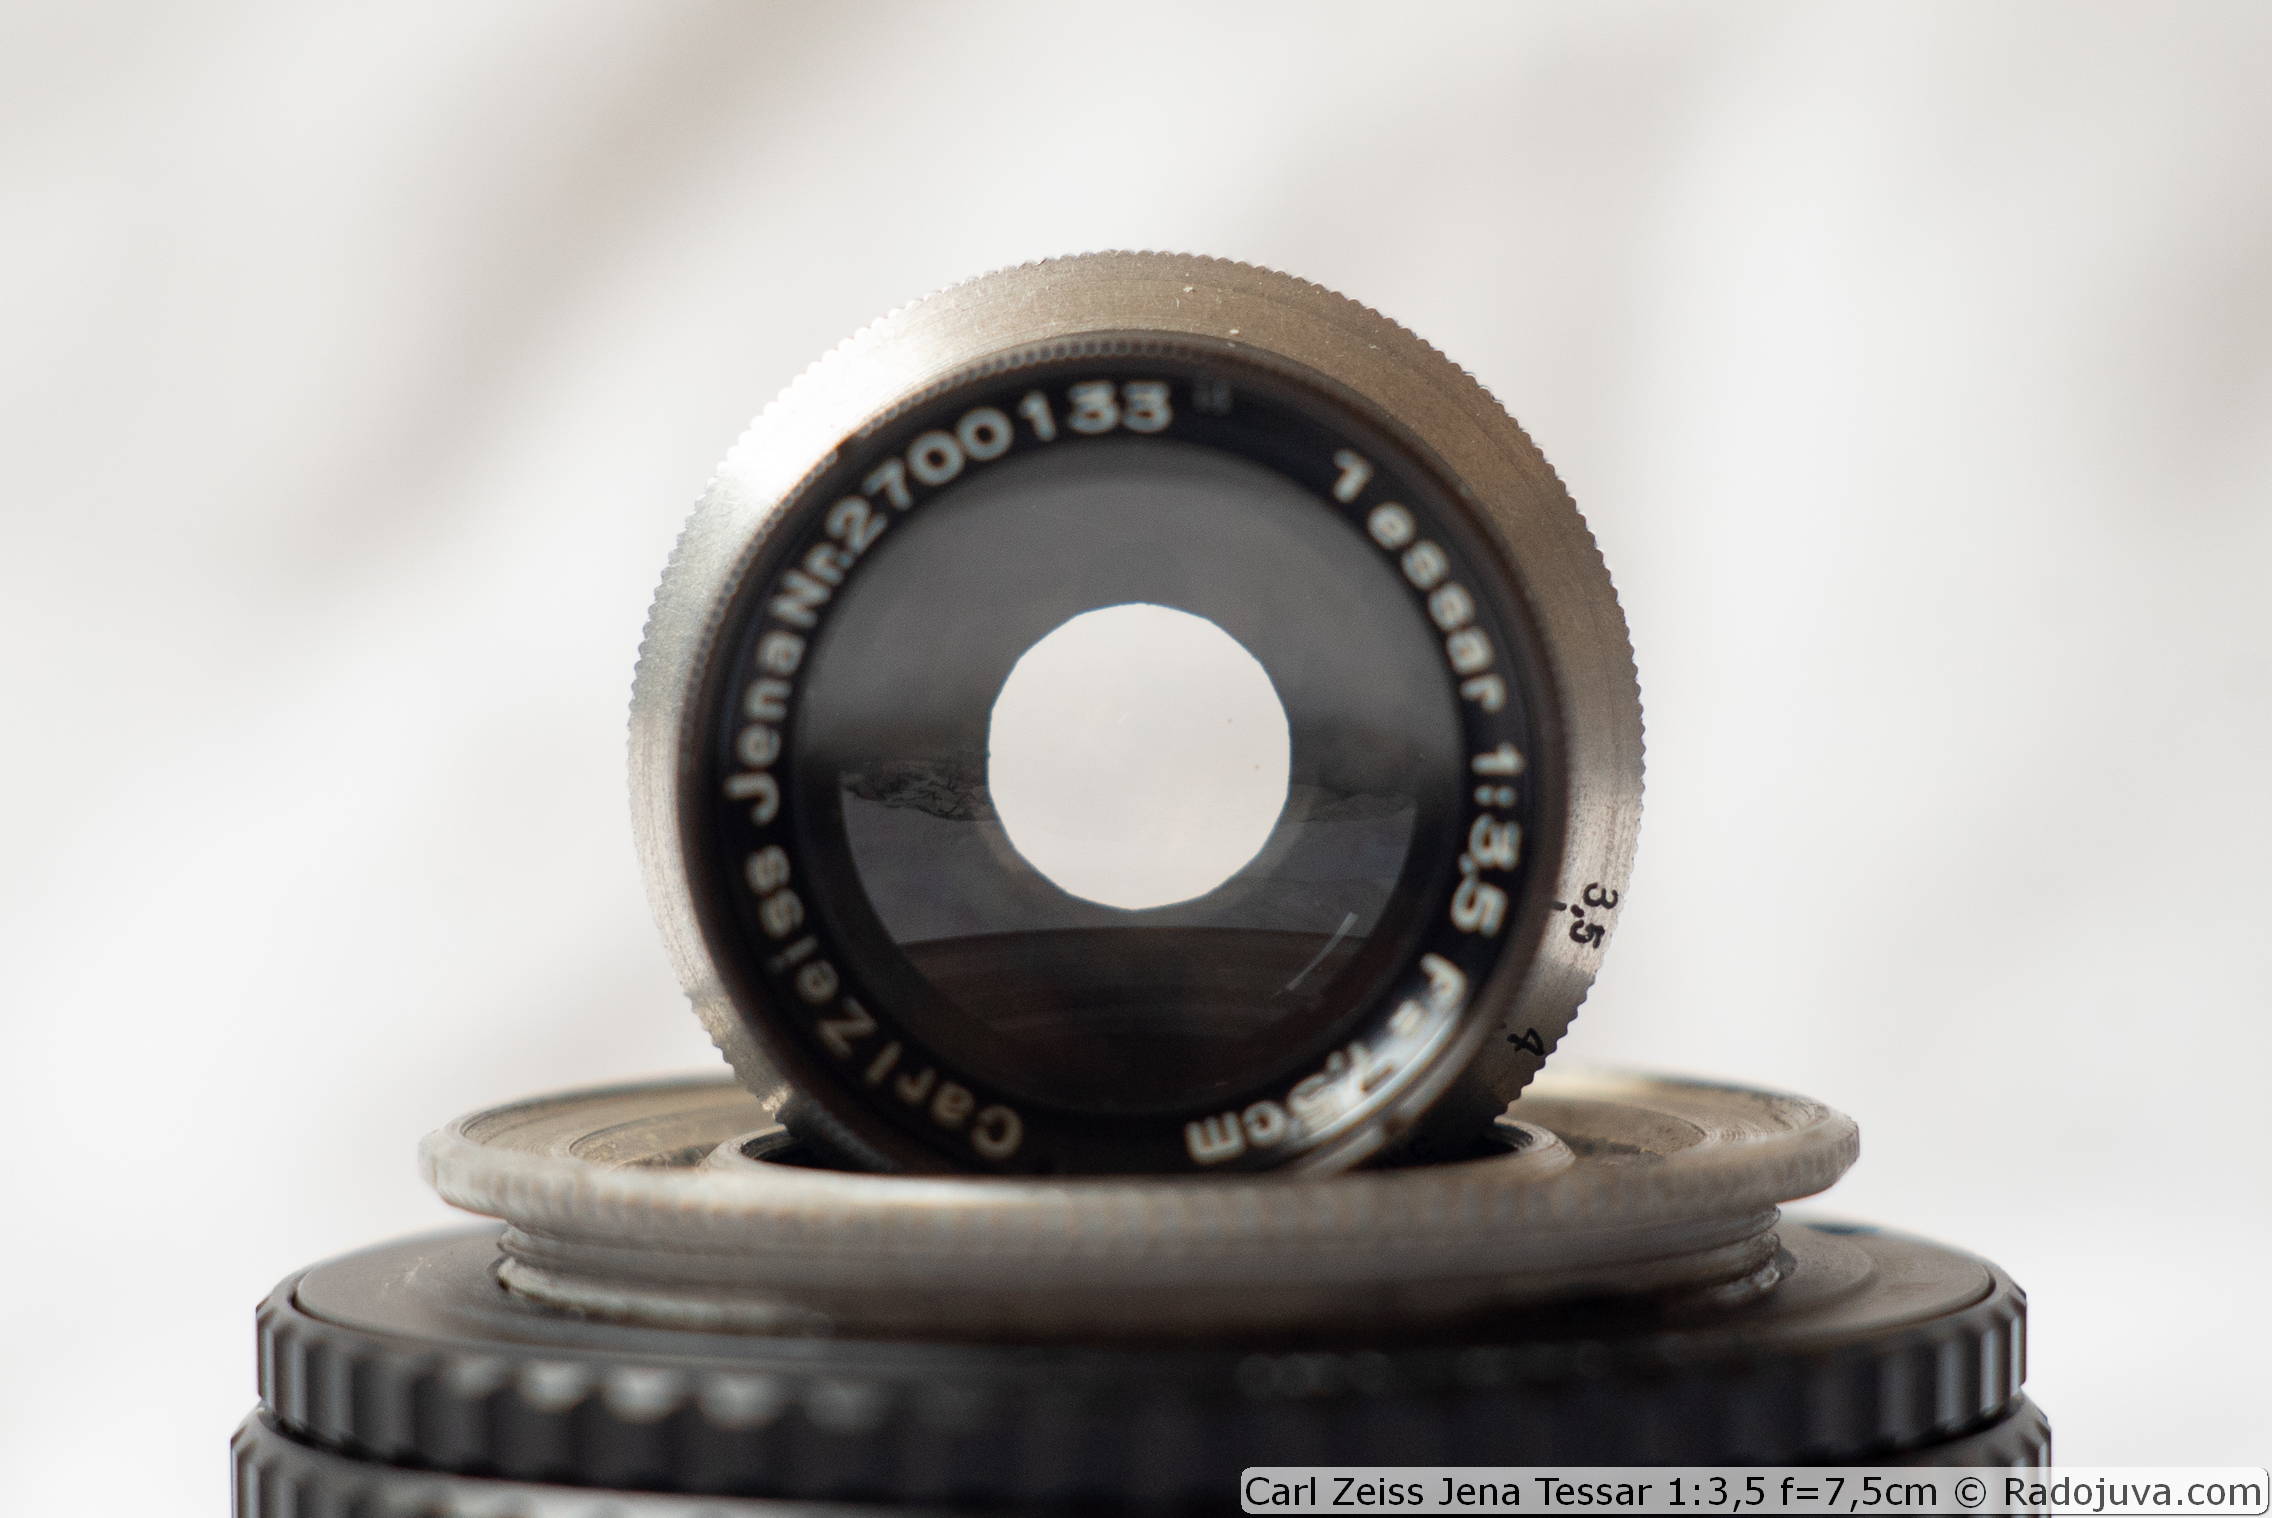 Brief review of the medium format lens Carl Zeiss Jena Tessar 1:3